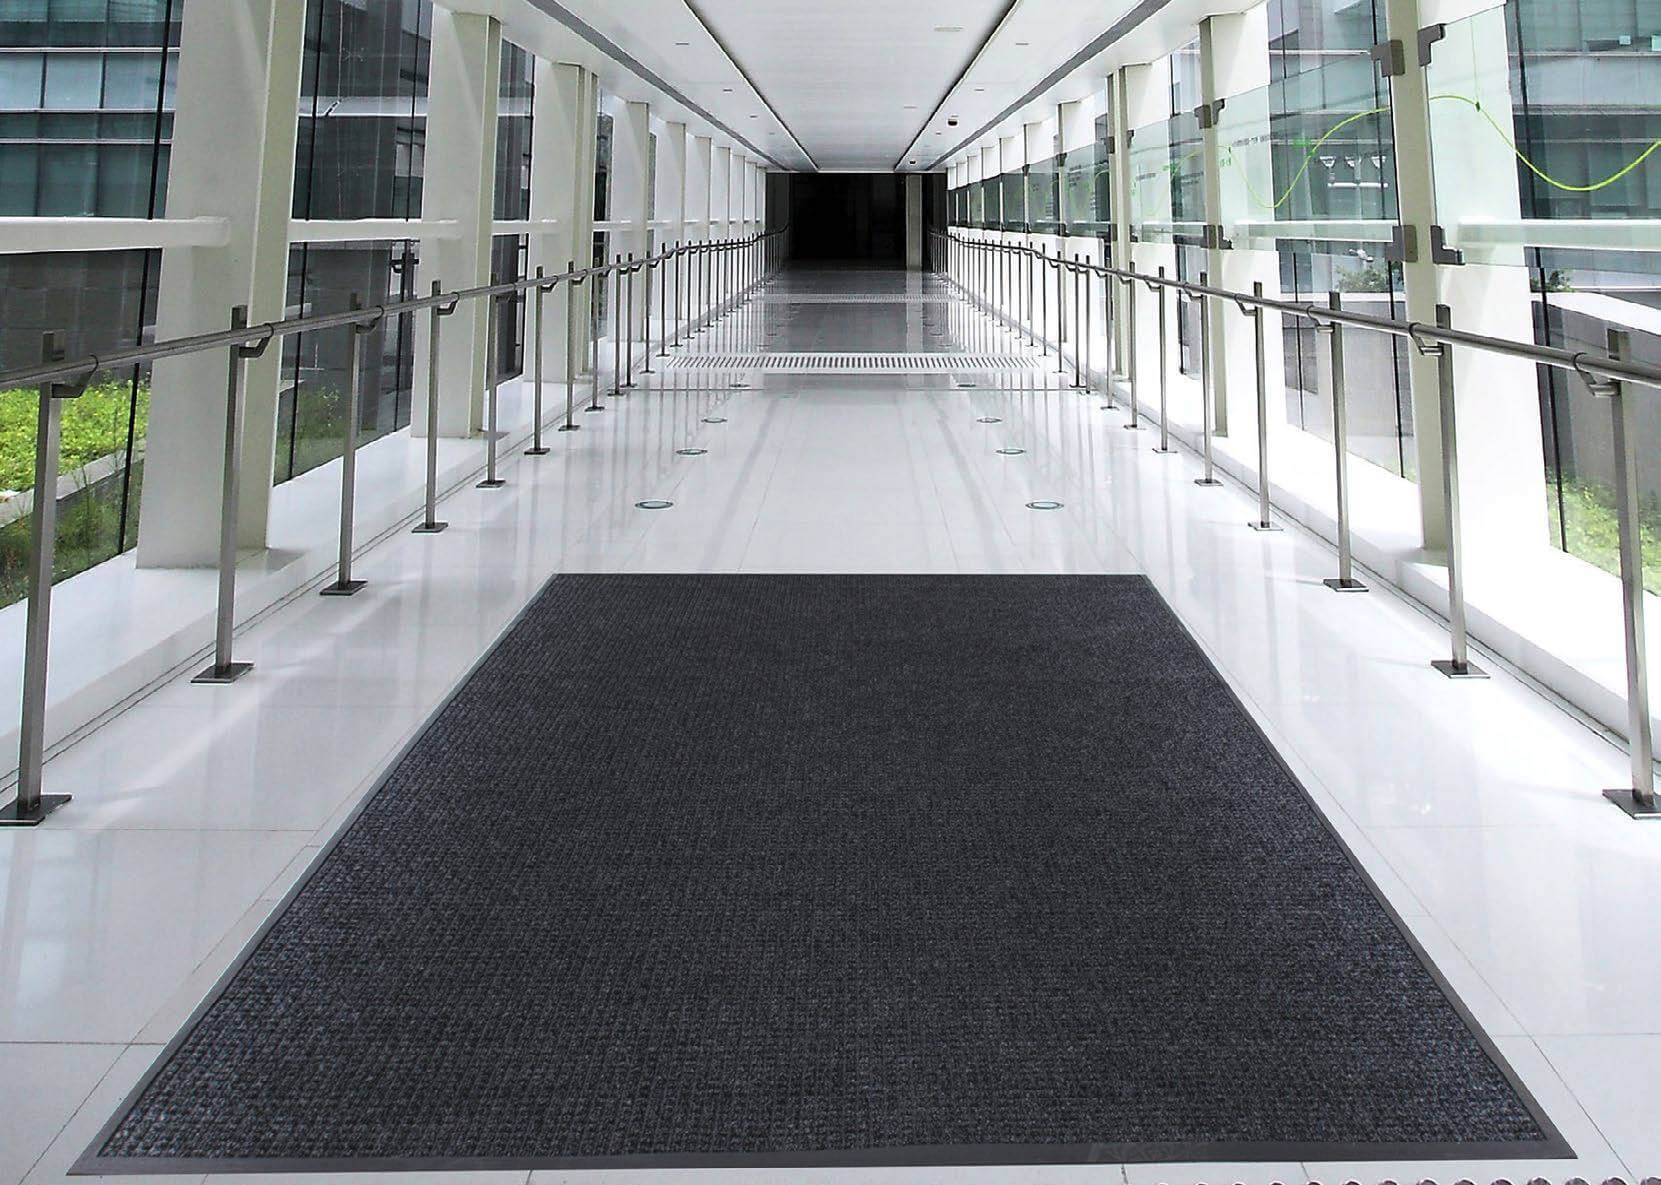 A black entrance mat is laid in a glass corridor with rails either side.